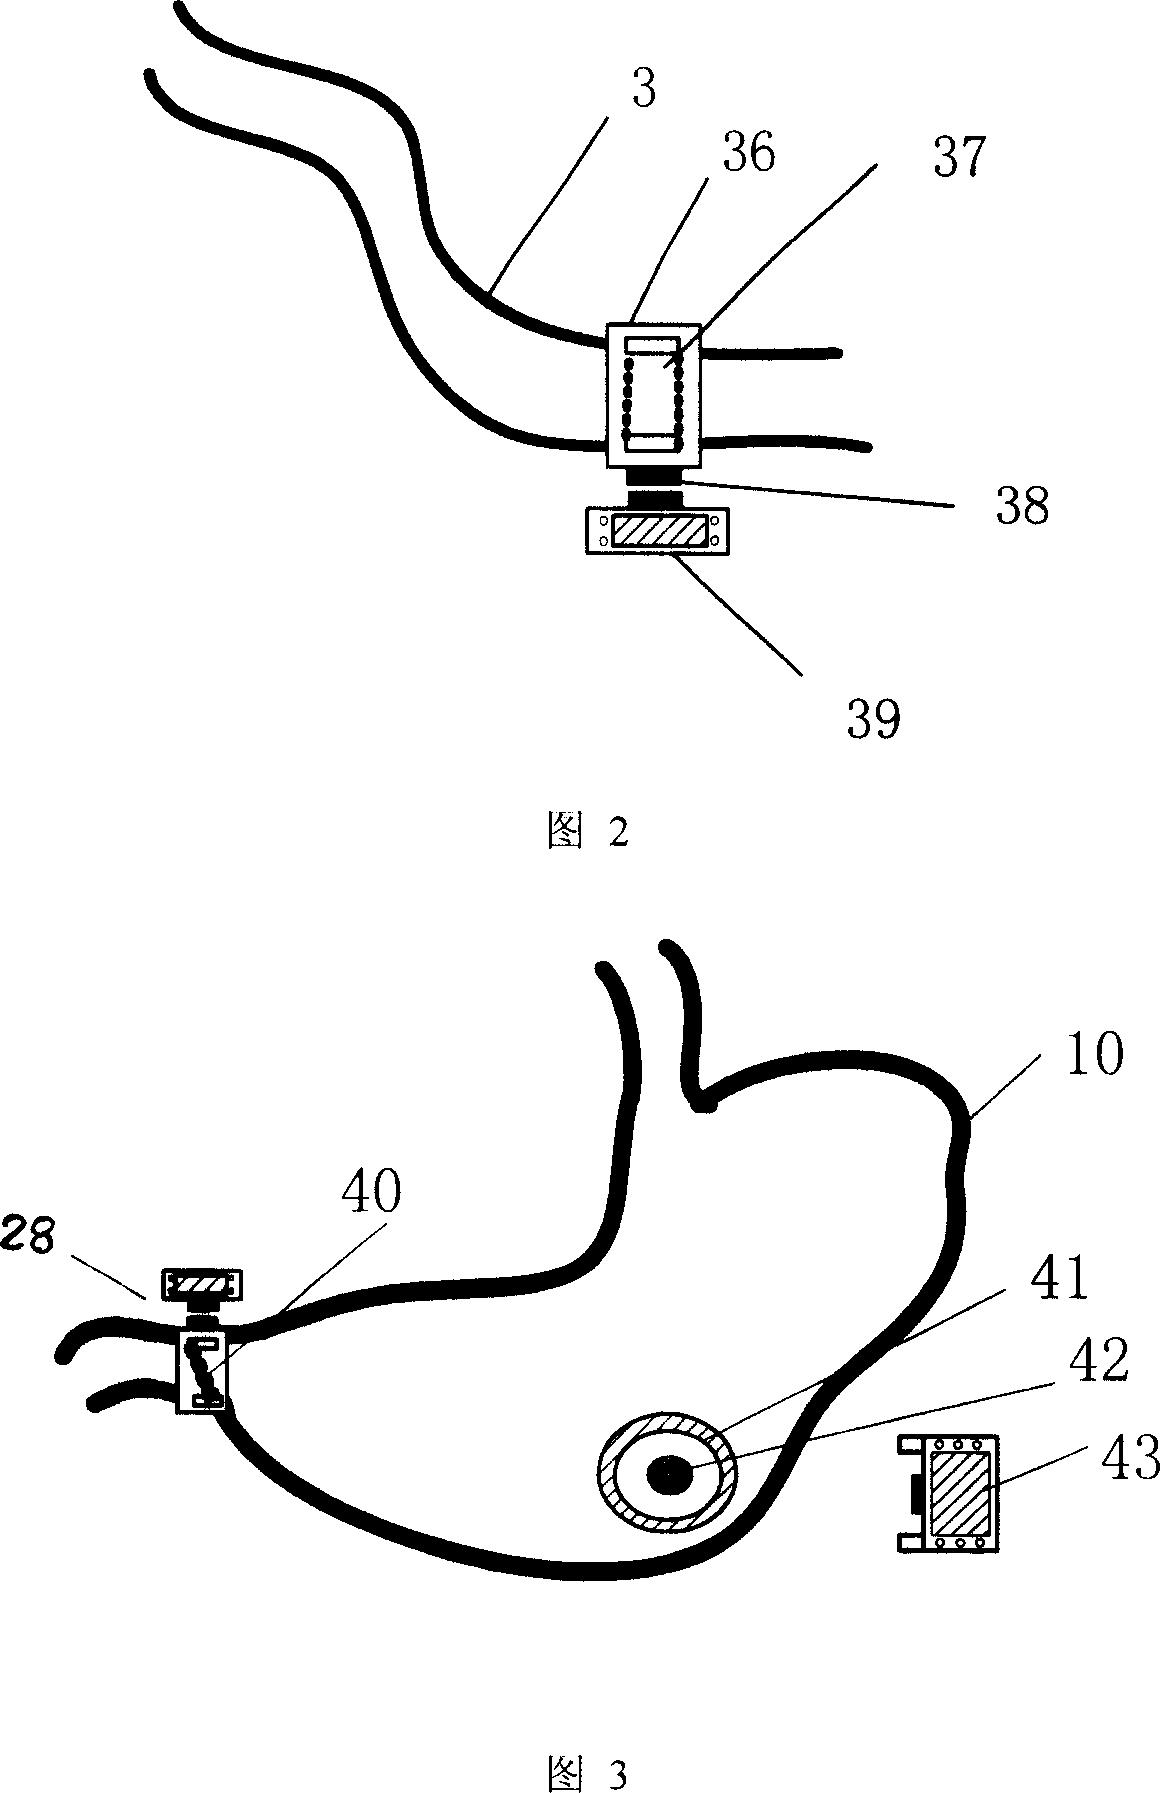 Analog device of alimentary system